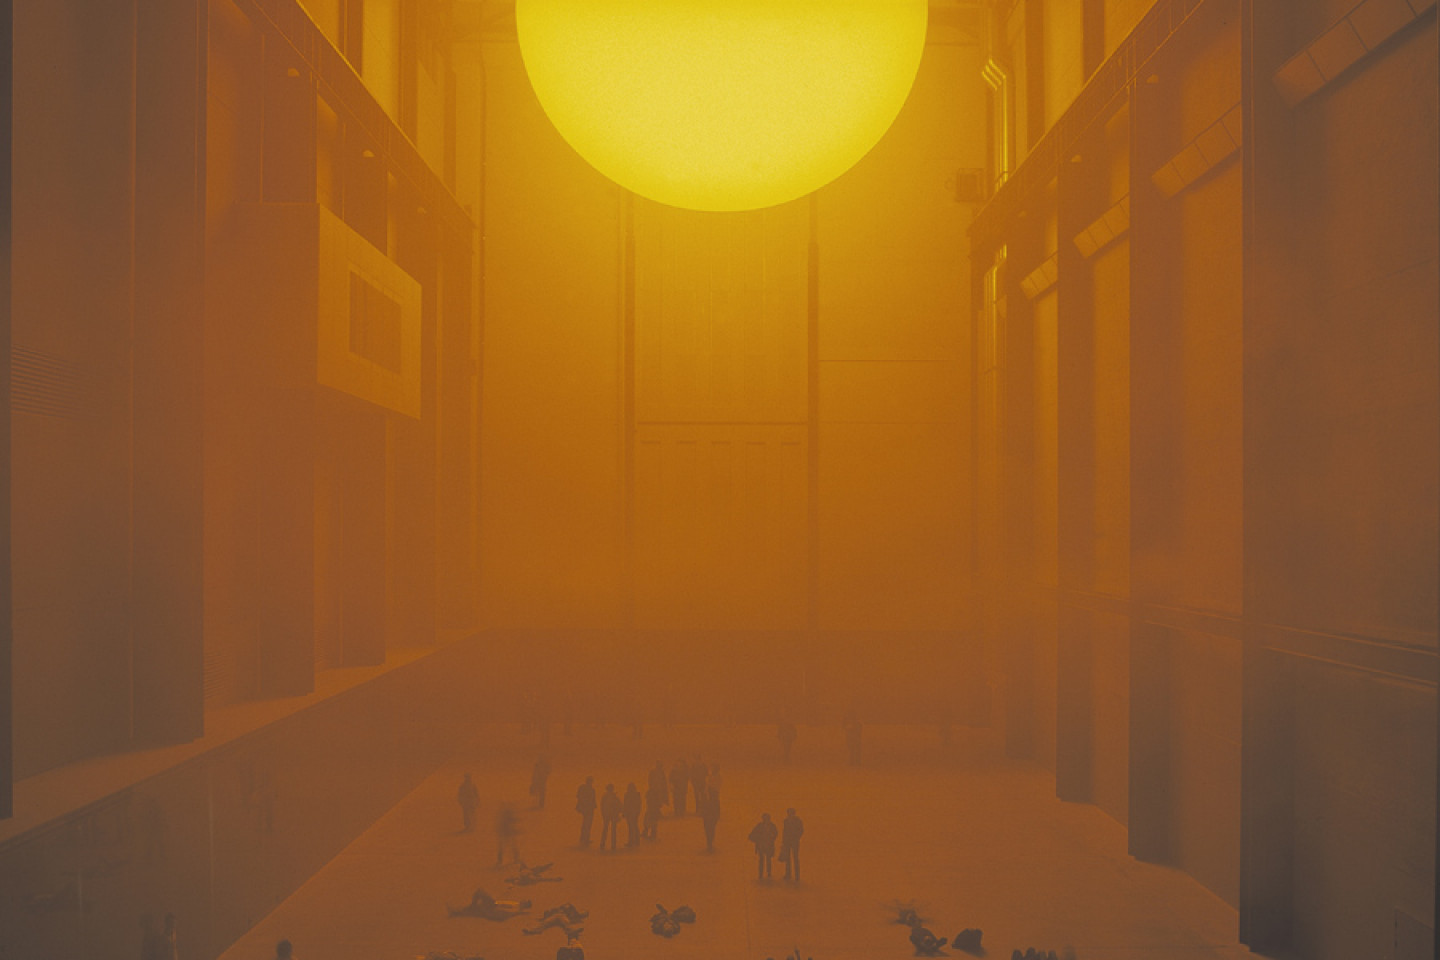  © The Weather Project in the Turbine Hall, 2004 © Tate Photography